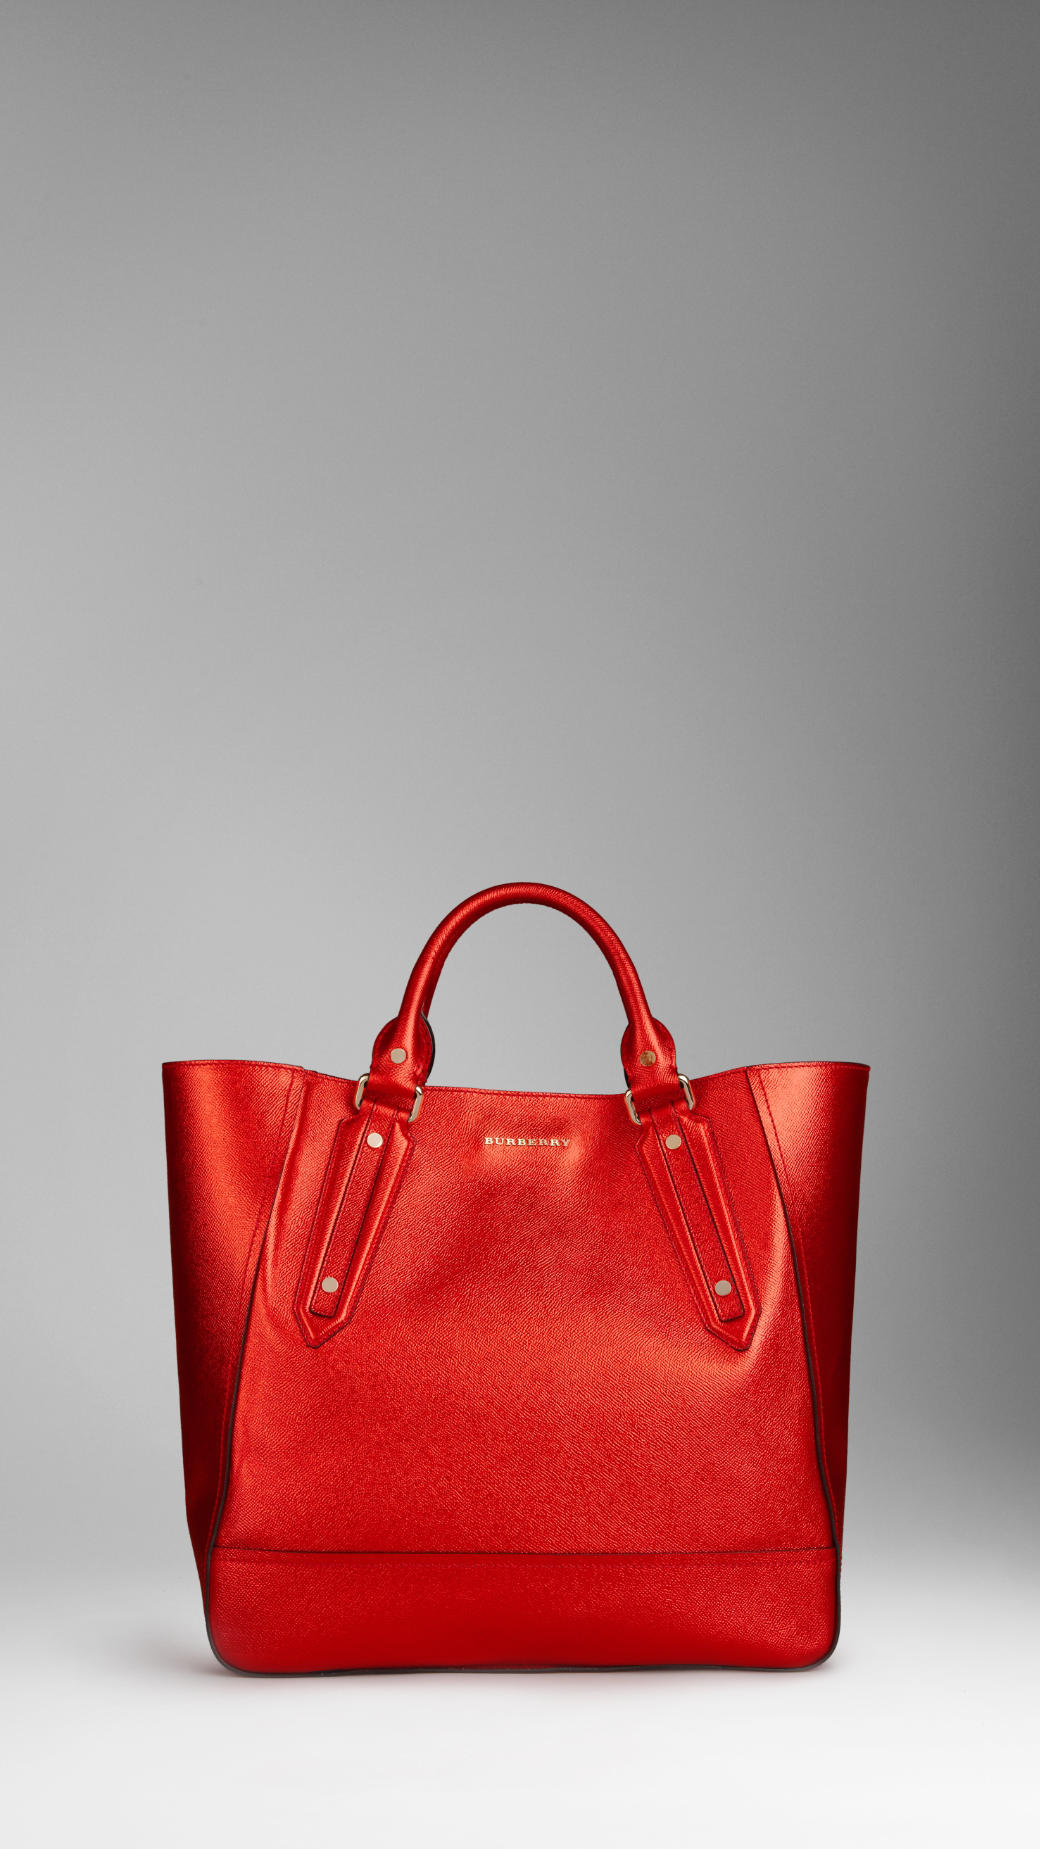 Burberry Large Patent Leather Landscape Tote Bag in Red (metallic ...